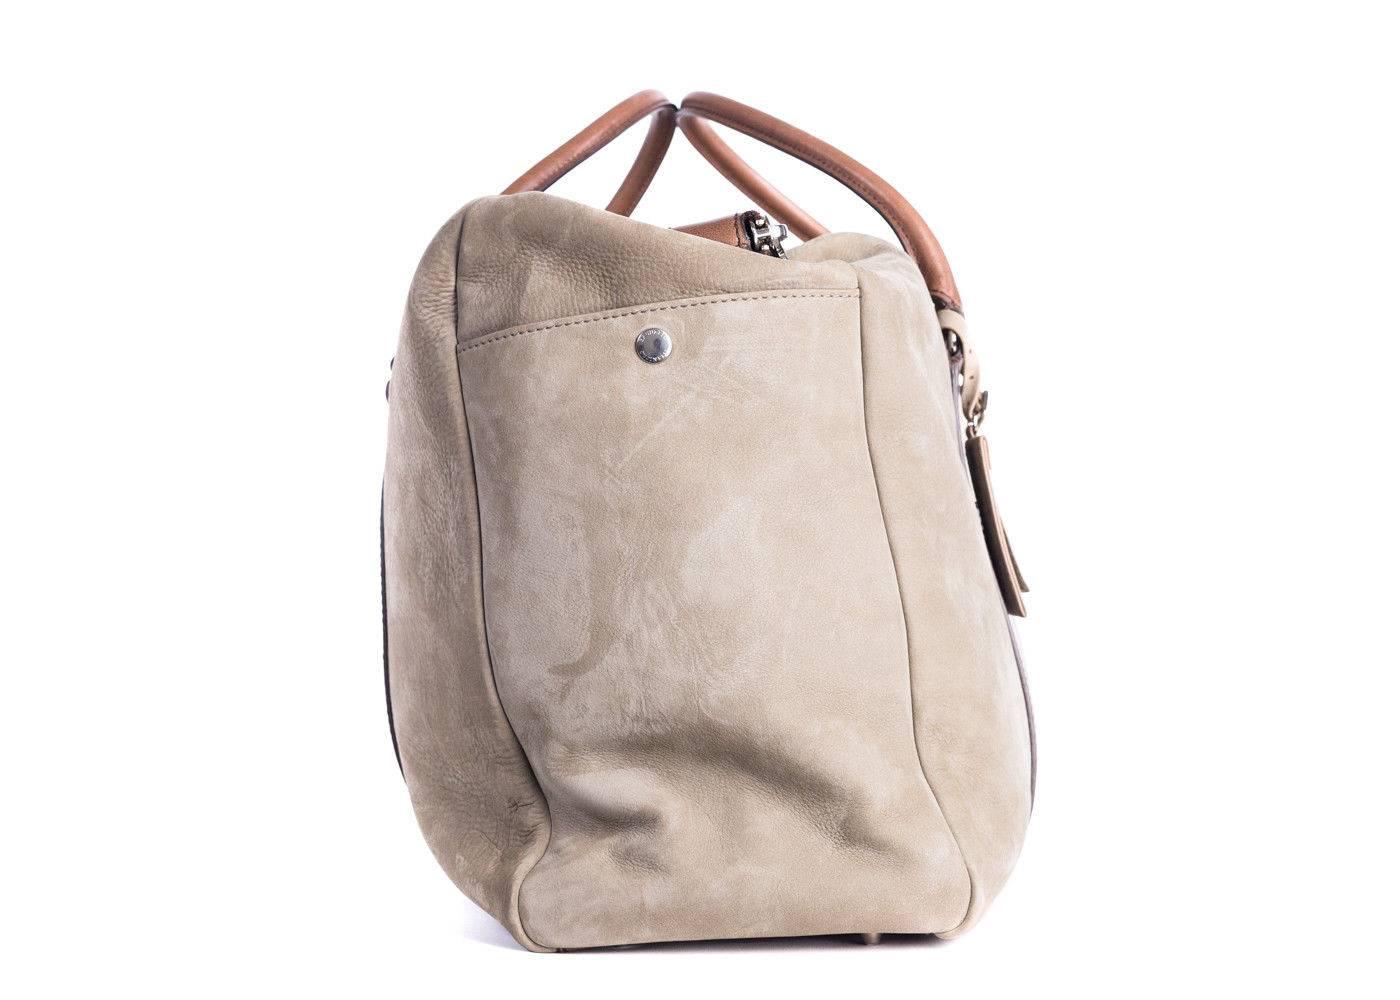 Brand New Brunello Cucinelli Travel Bag
Dust Bag Included
Retails in Stores & Online for $3259
Dimensions: 24